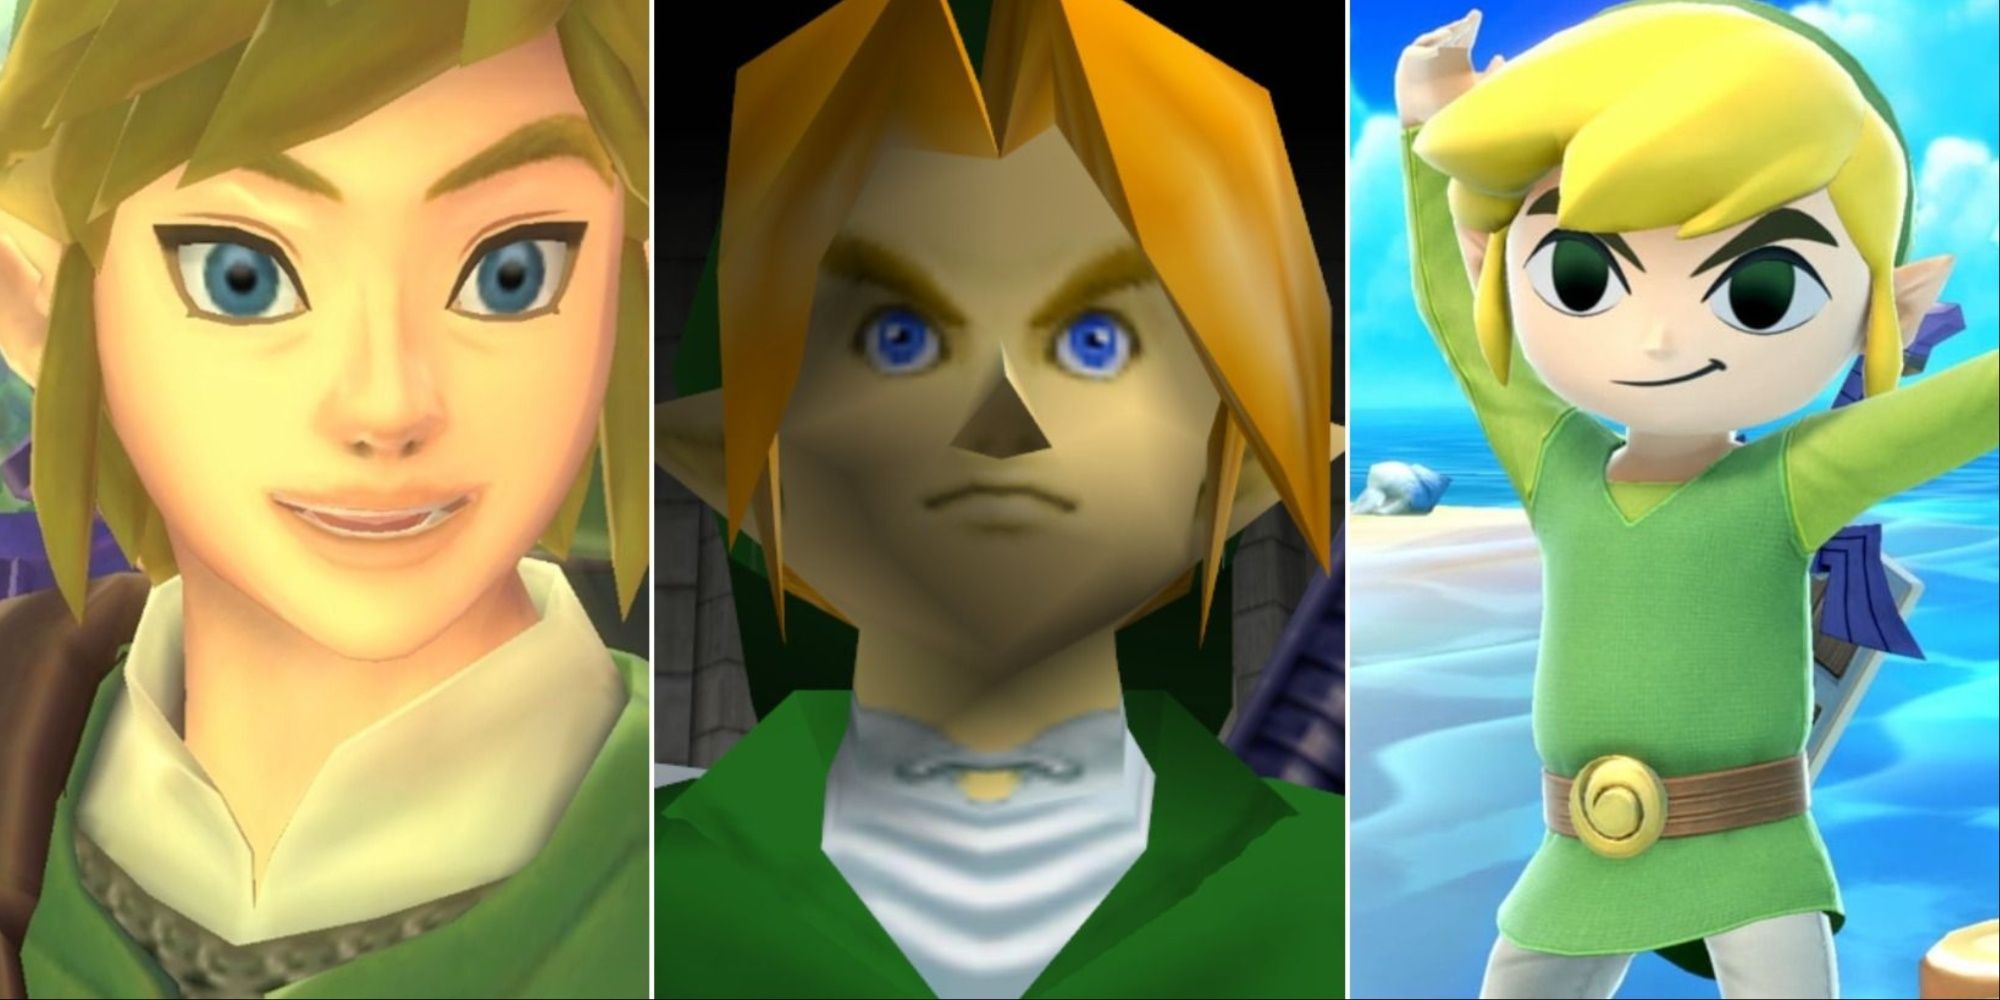 The Legend of Zelda : Ocarina of Time Perfect Guide - Loe, Casey